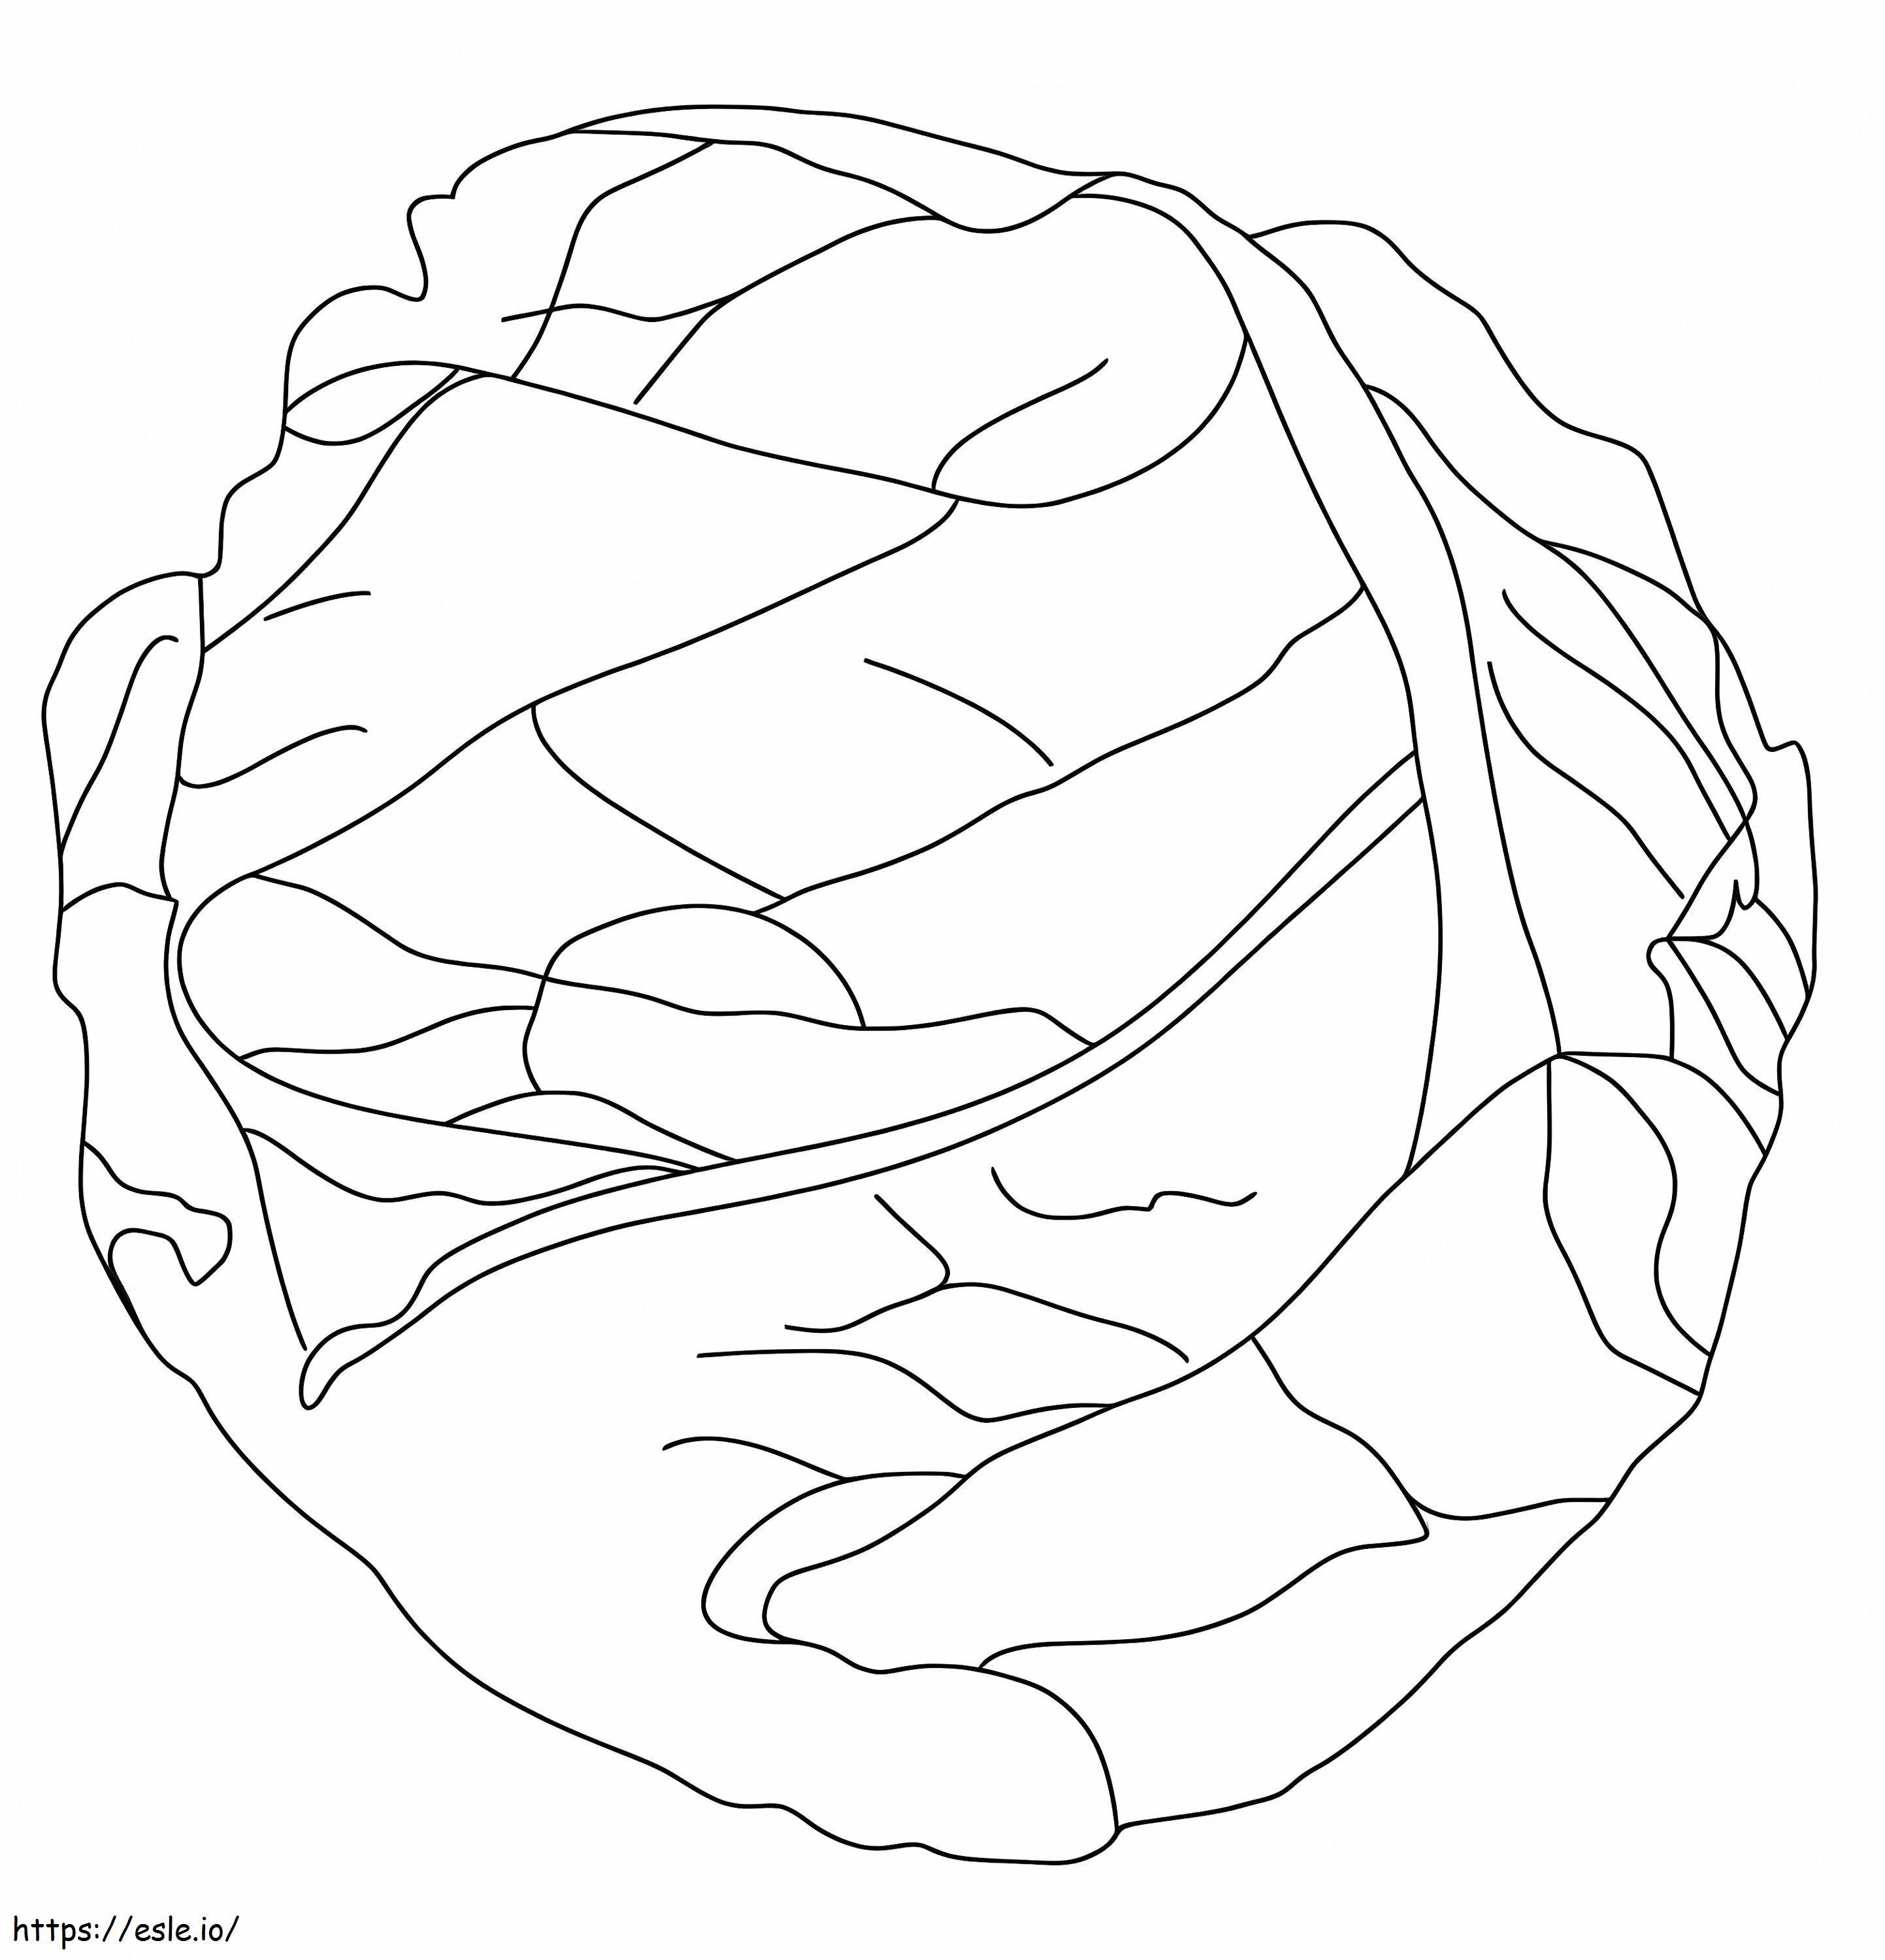 Regular Cabbage coloring page